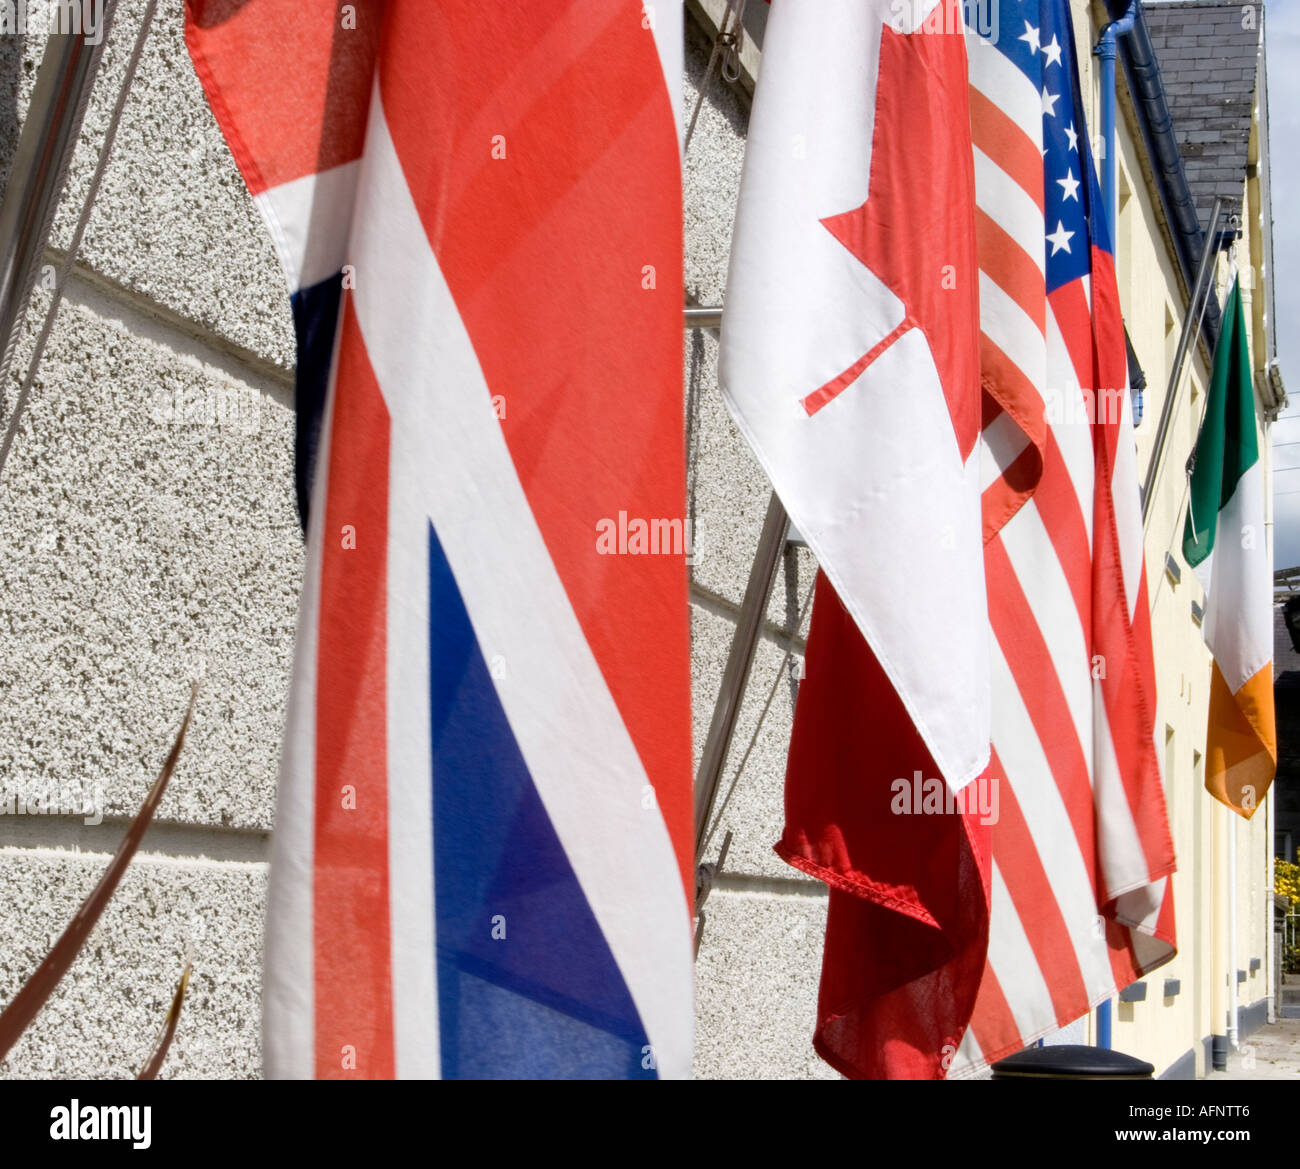 Flags not flying on flag poles Stock Photo